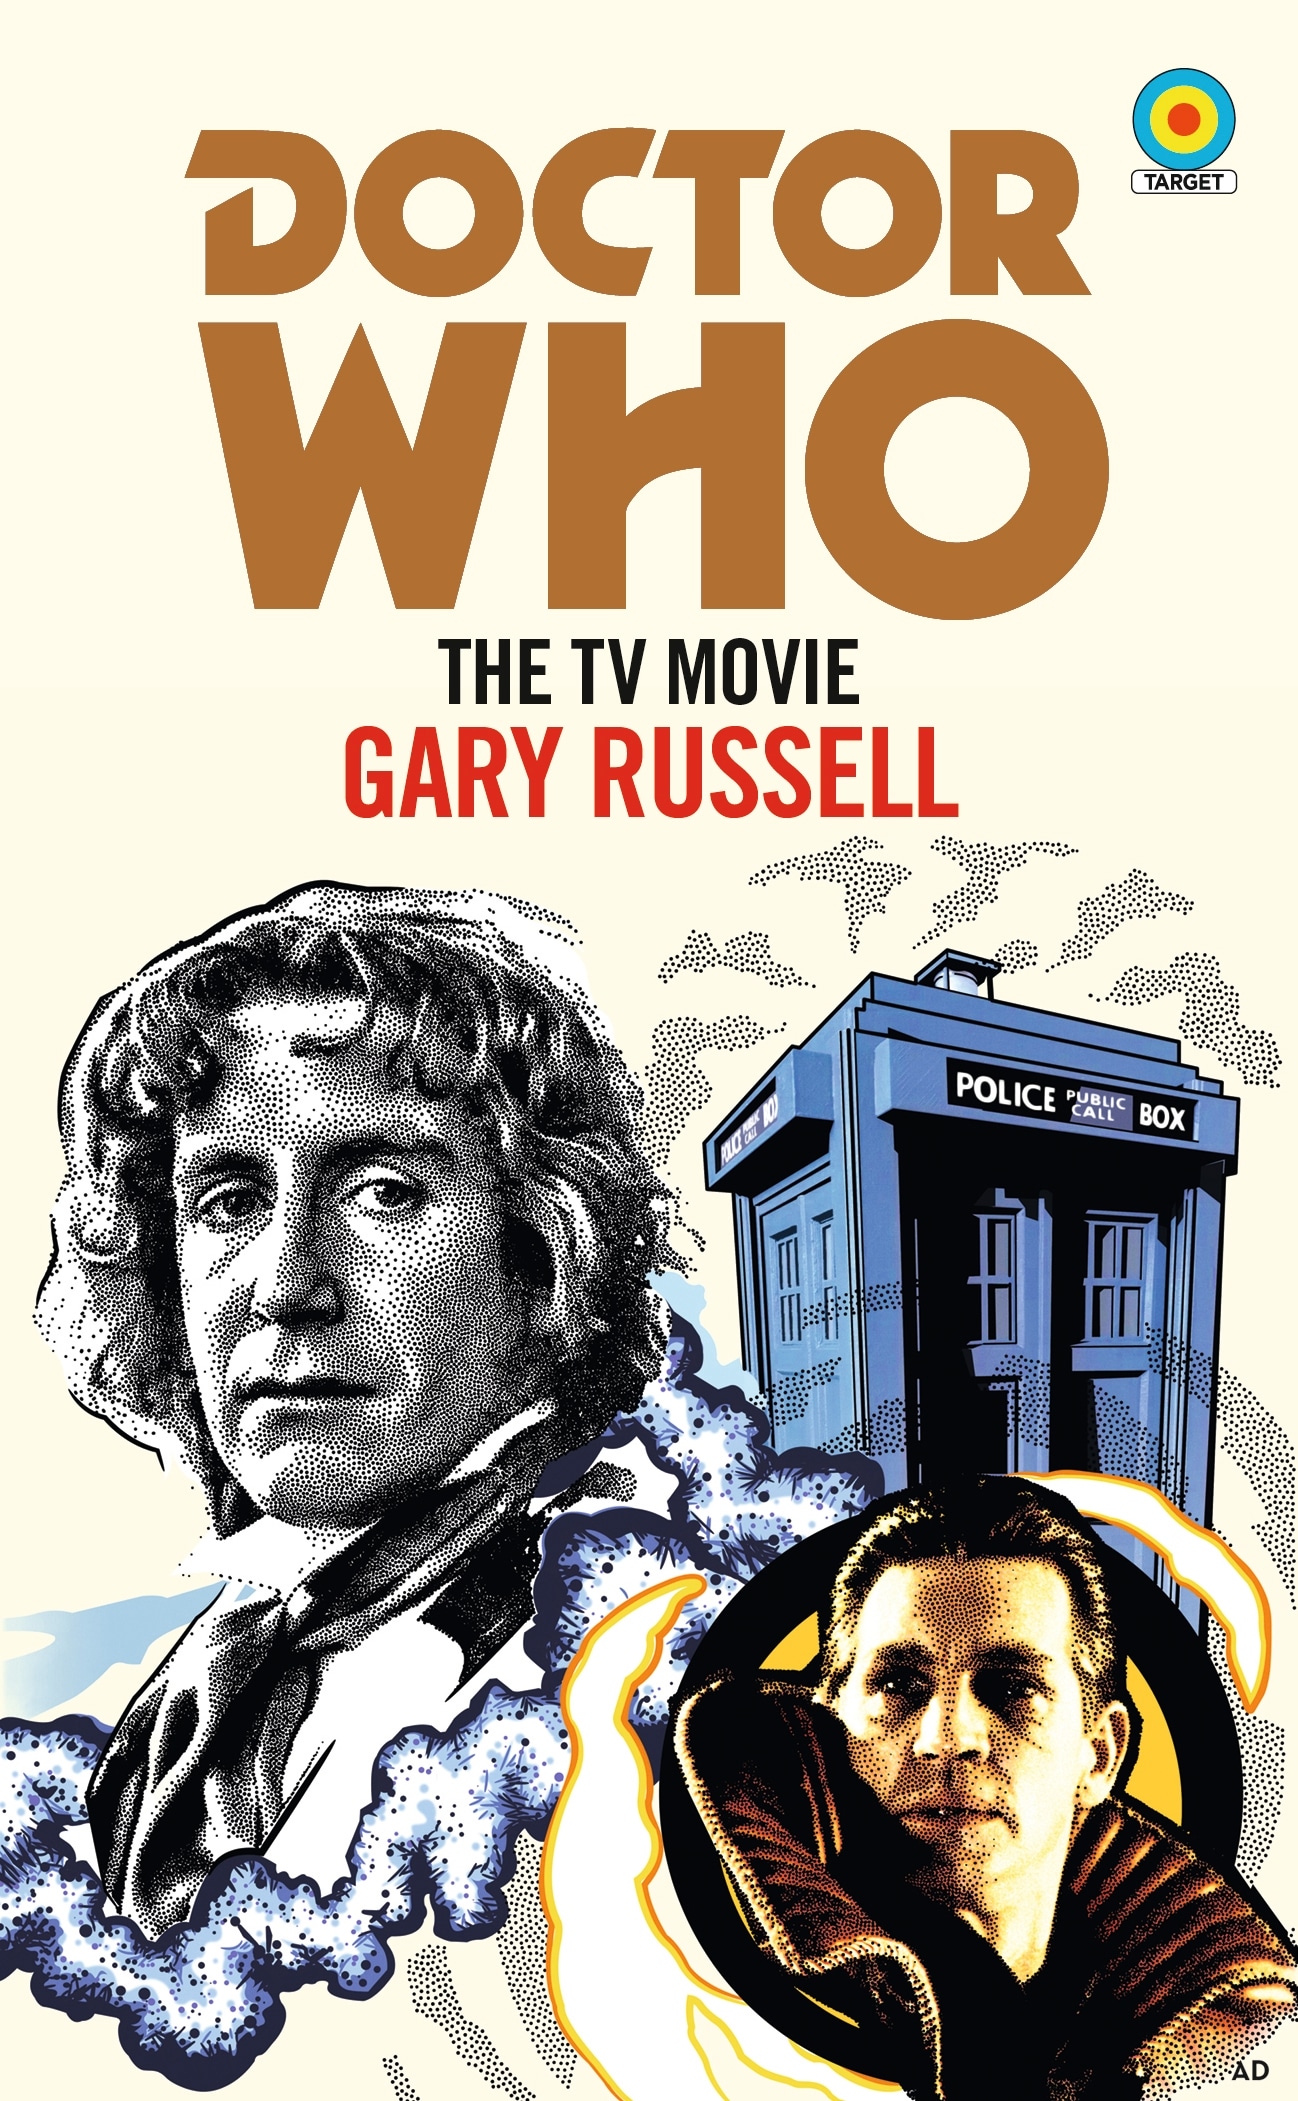 Book “Doctor Who: The TV Movie (Target Collection)” by Gary Russell — March 11, 2021